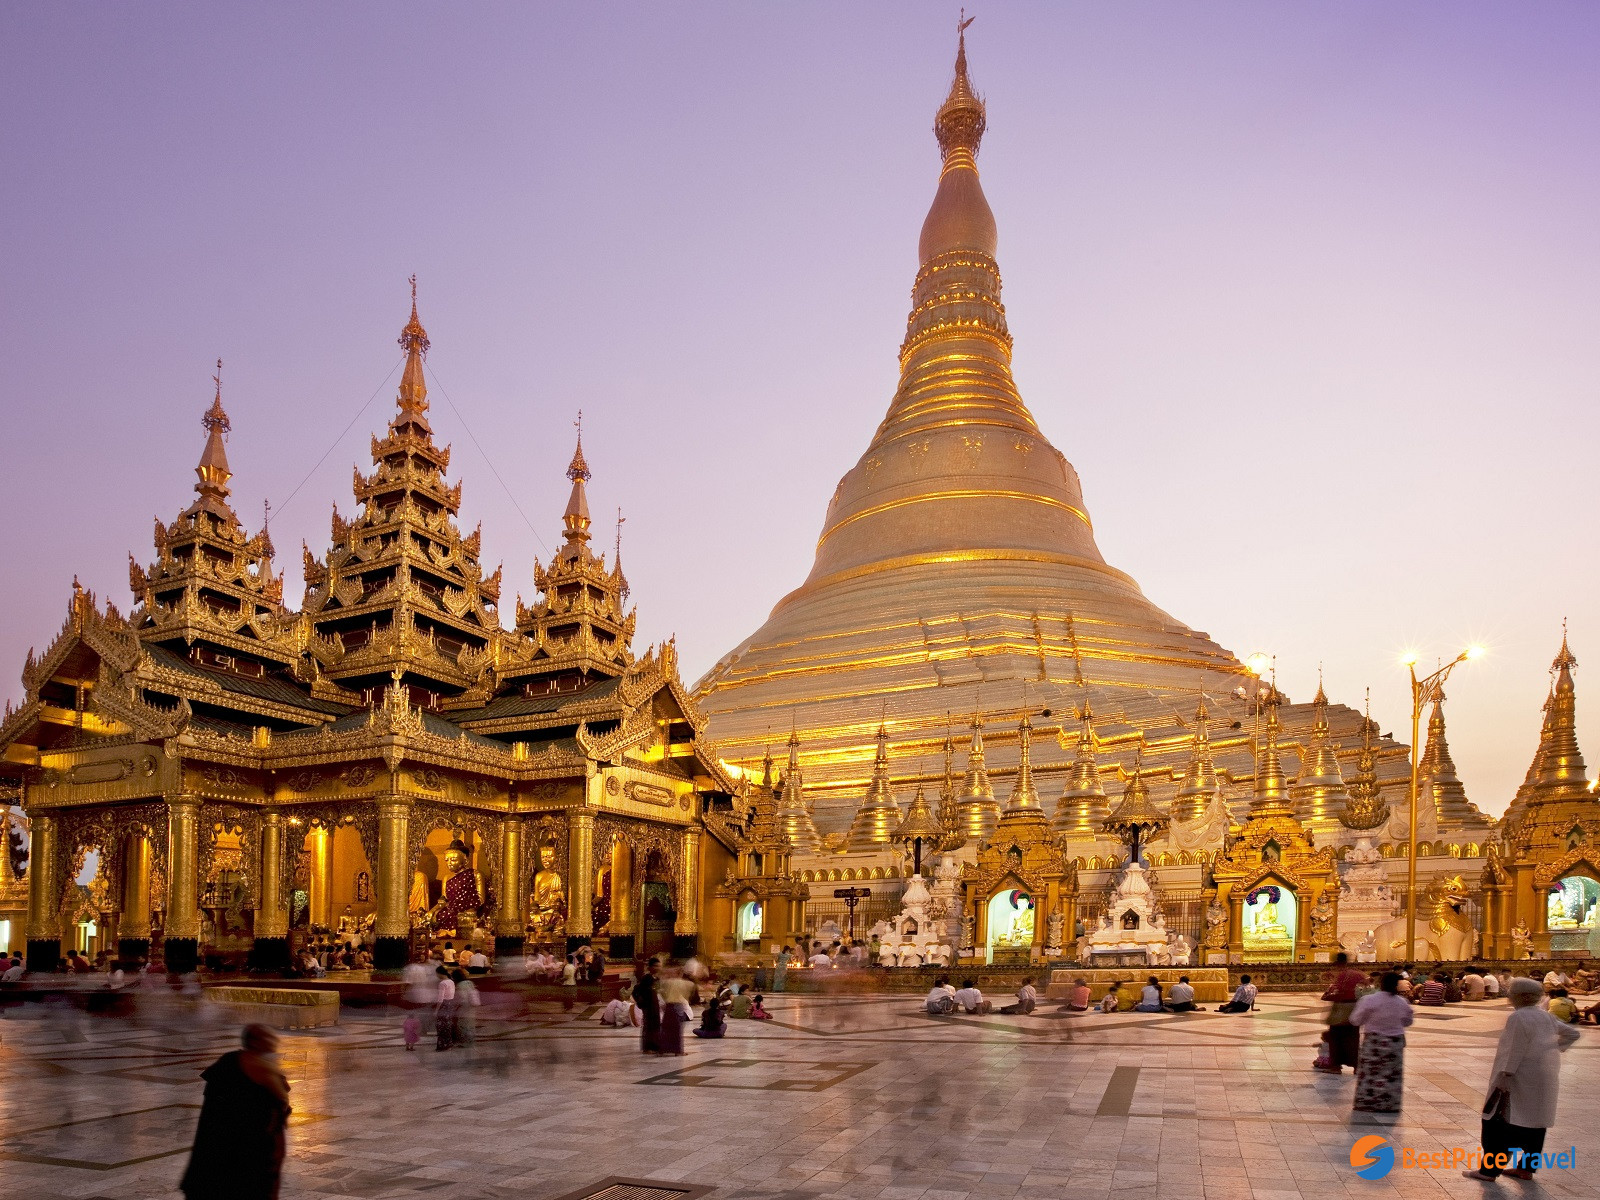 Shwedagon Pagoda is the main highlight of one day trip in Yangon